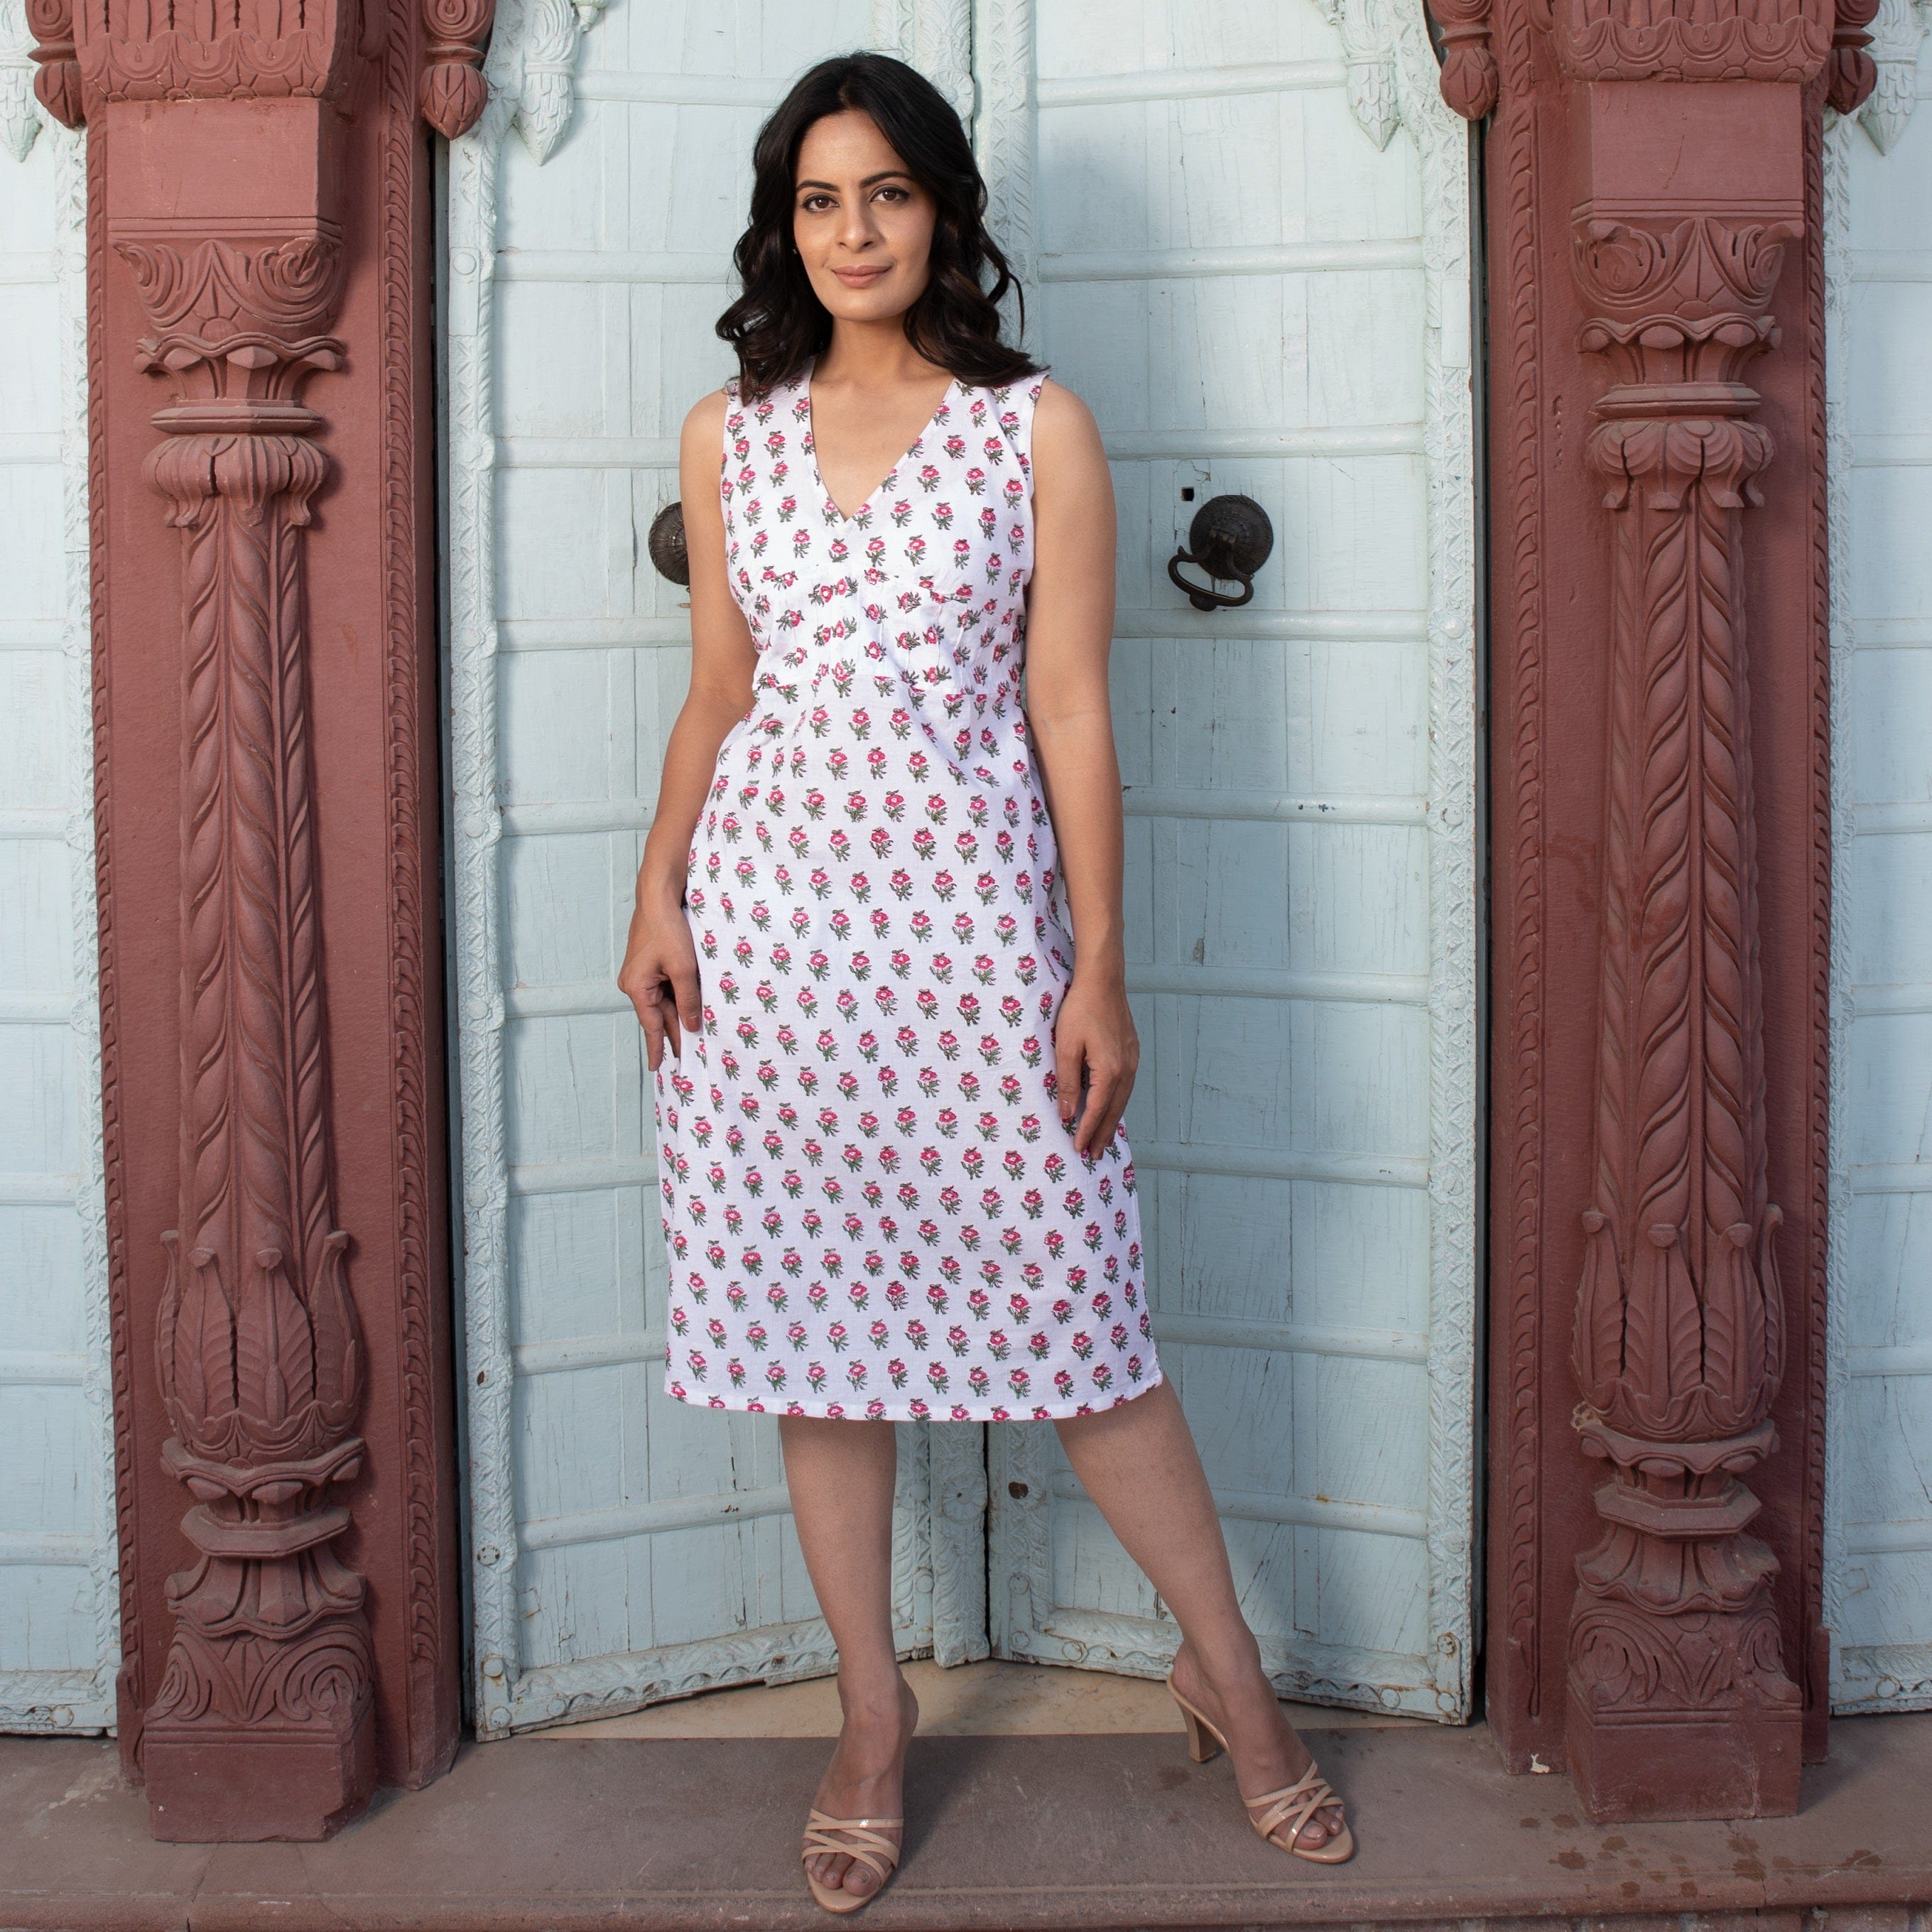 designer trendy handblock cotton dress in white and pink flowers with sequins for online shopping india using natural dye